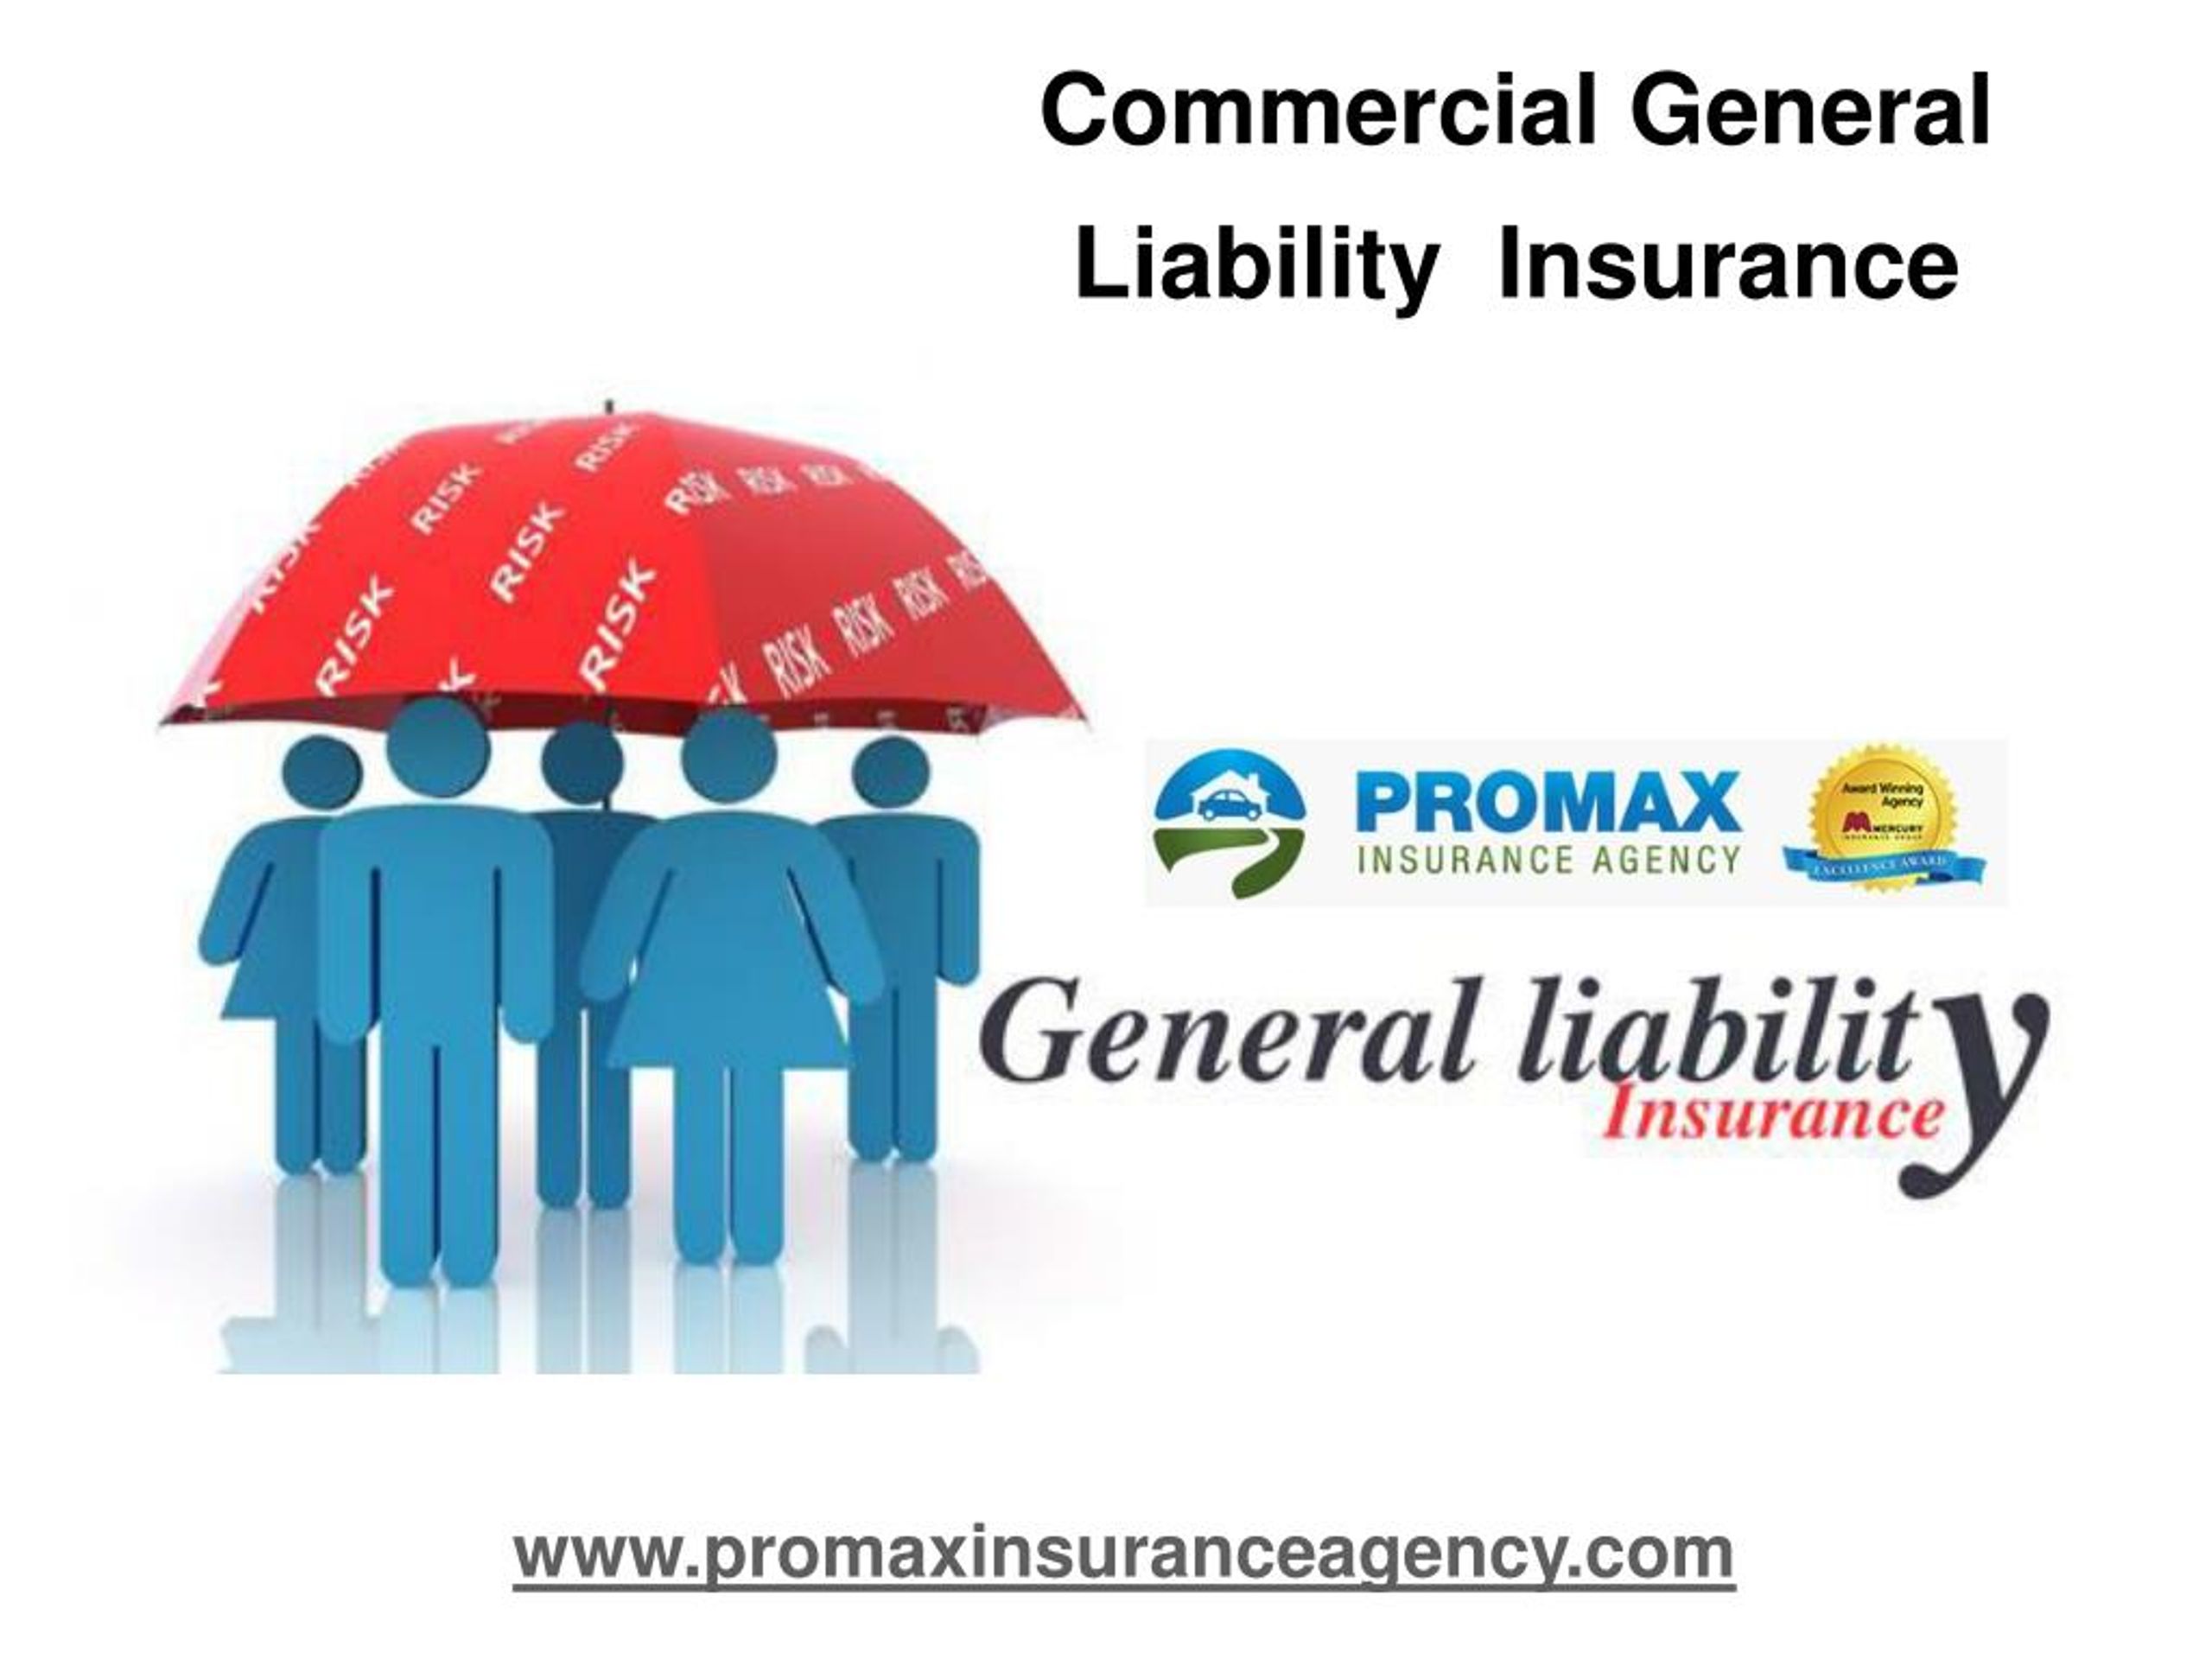 PPT Commercial General Liability Insurance in CA PowerPoint Presentation ID8002736